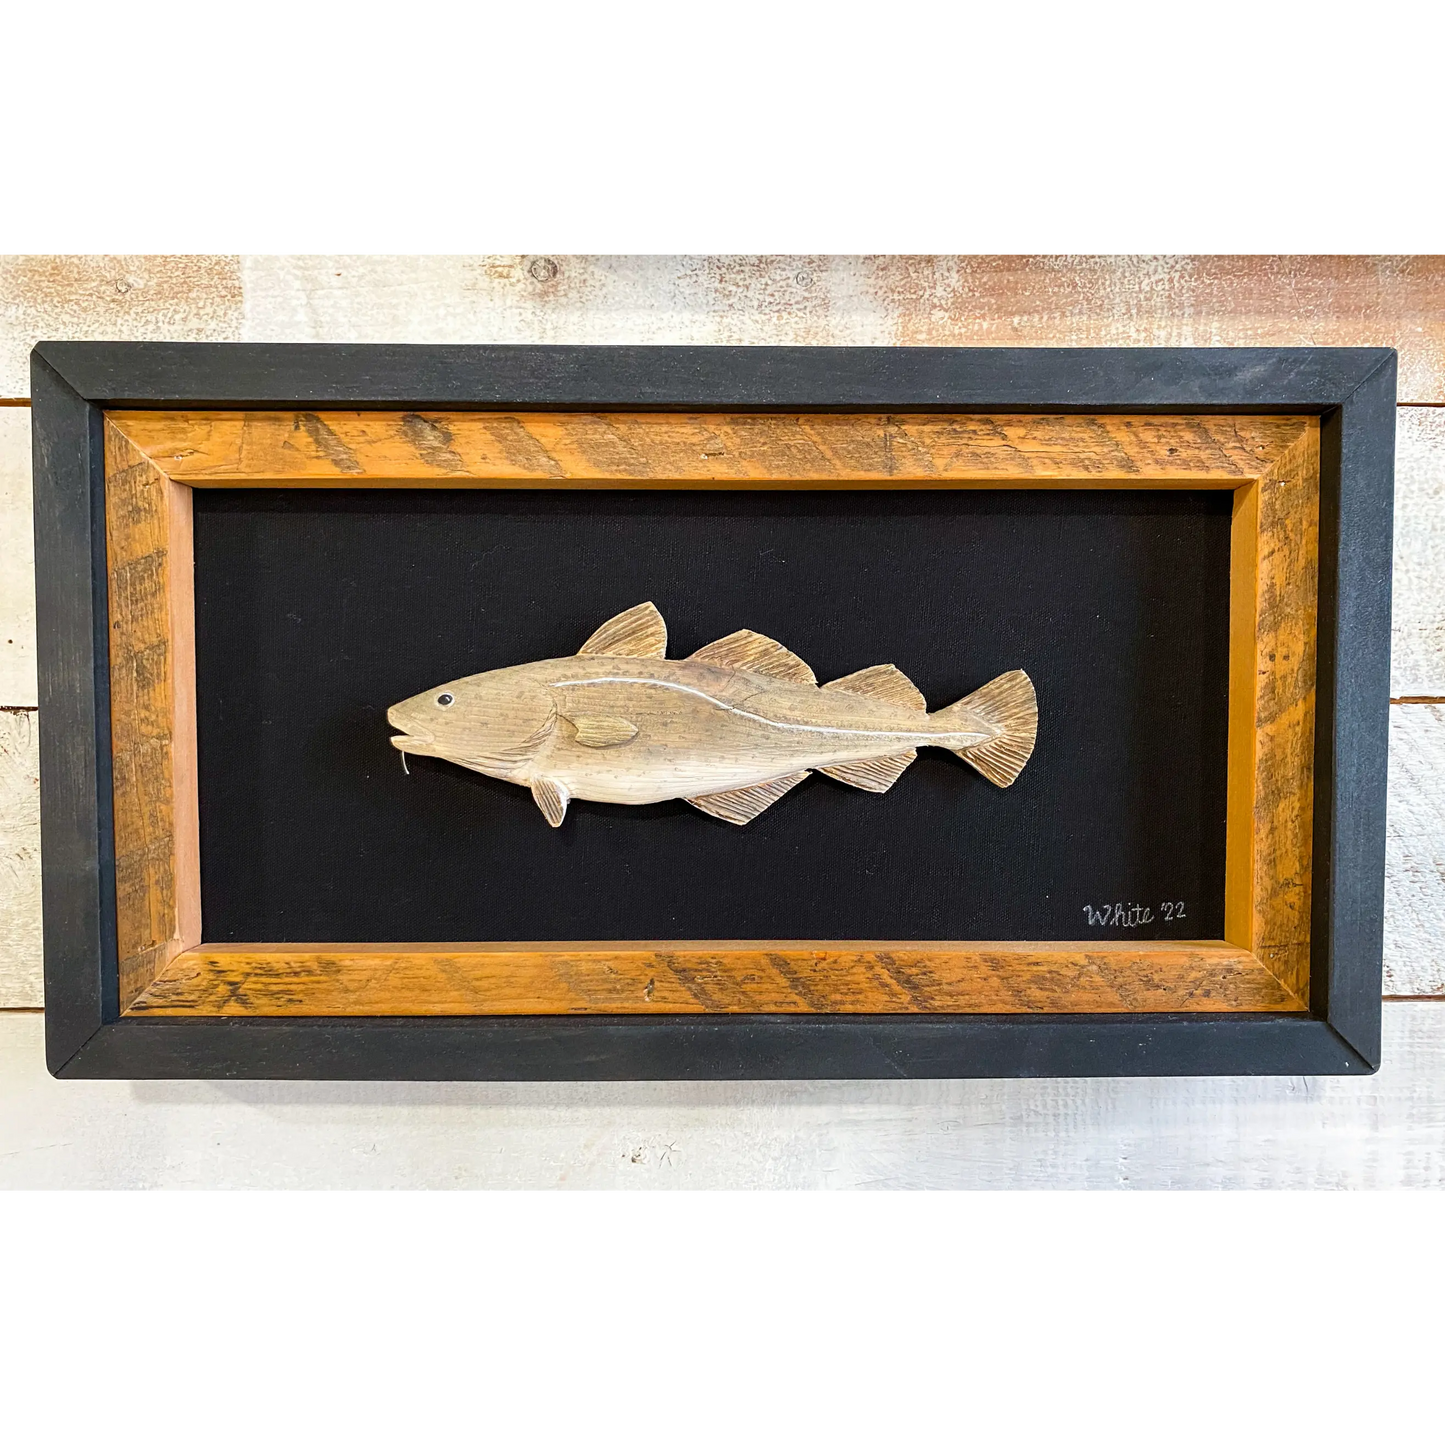 "The Cod Fish" is an original driftwood mixed-media art piece of a cod fish.